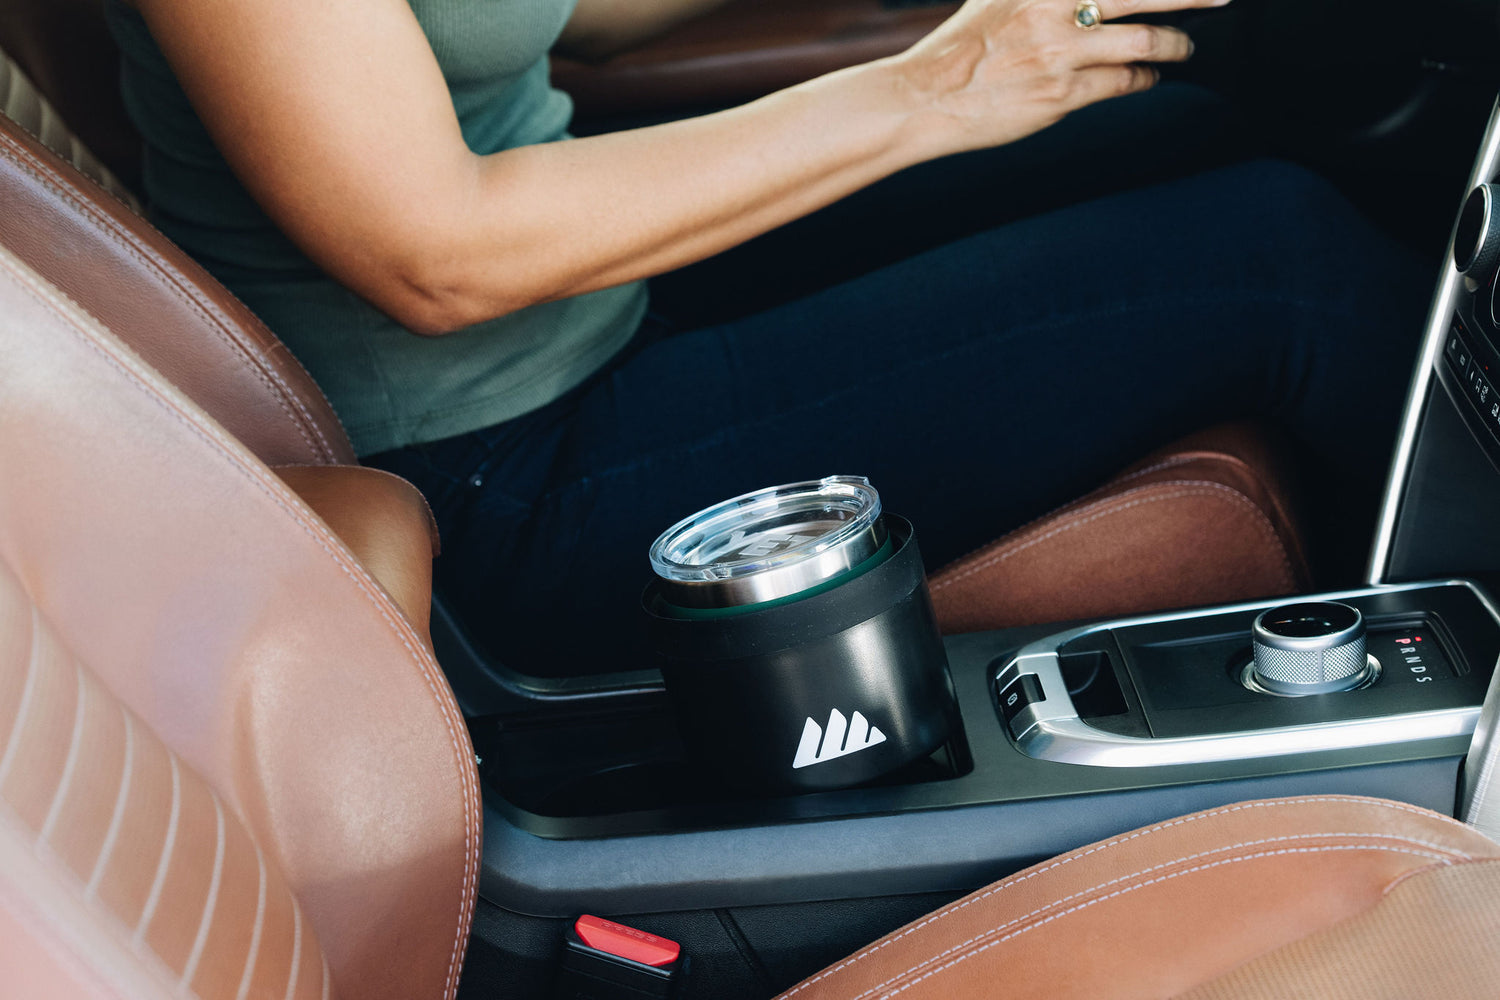 ULTIMATE EXPANDER® - Expandable Cup Holder up to 4.0 – Integral Travel